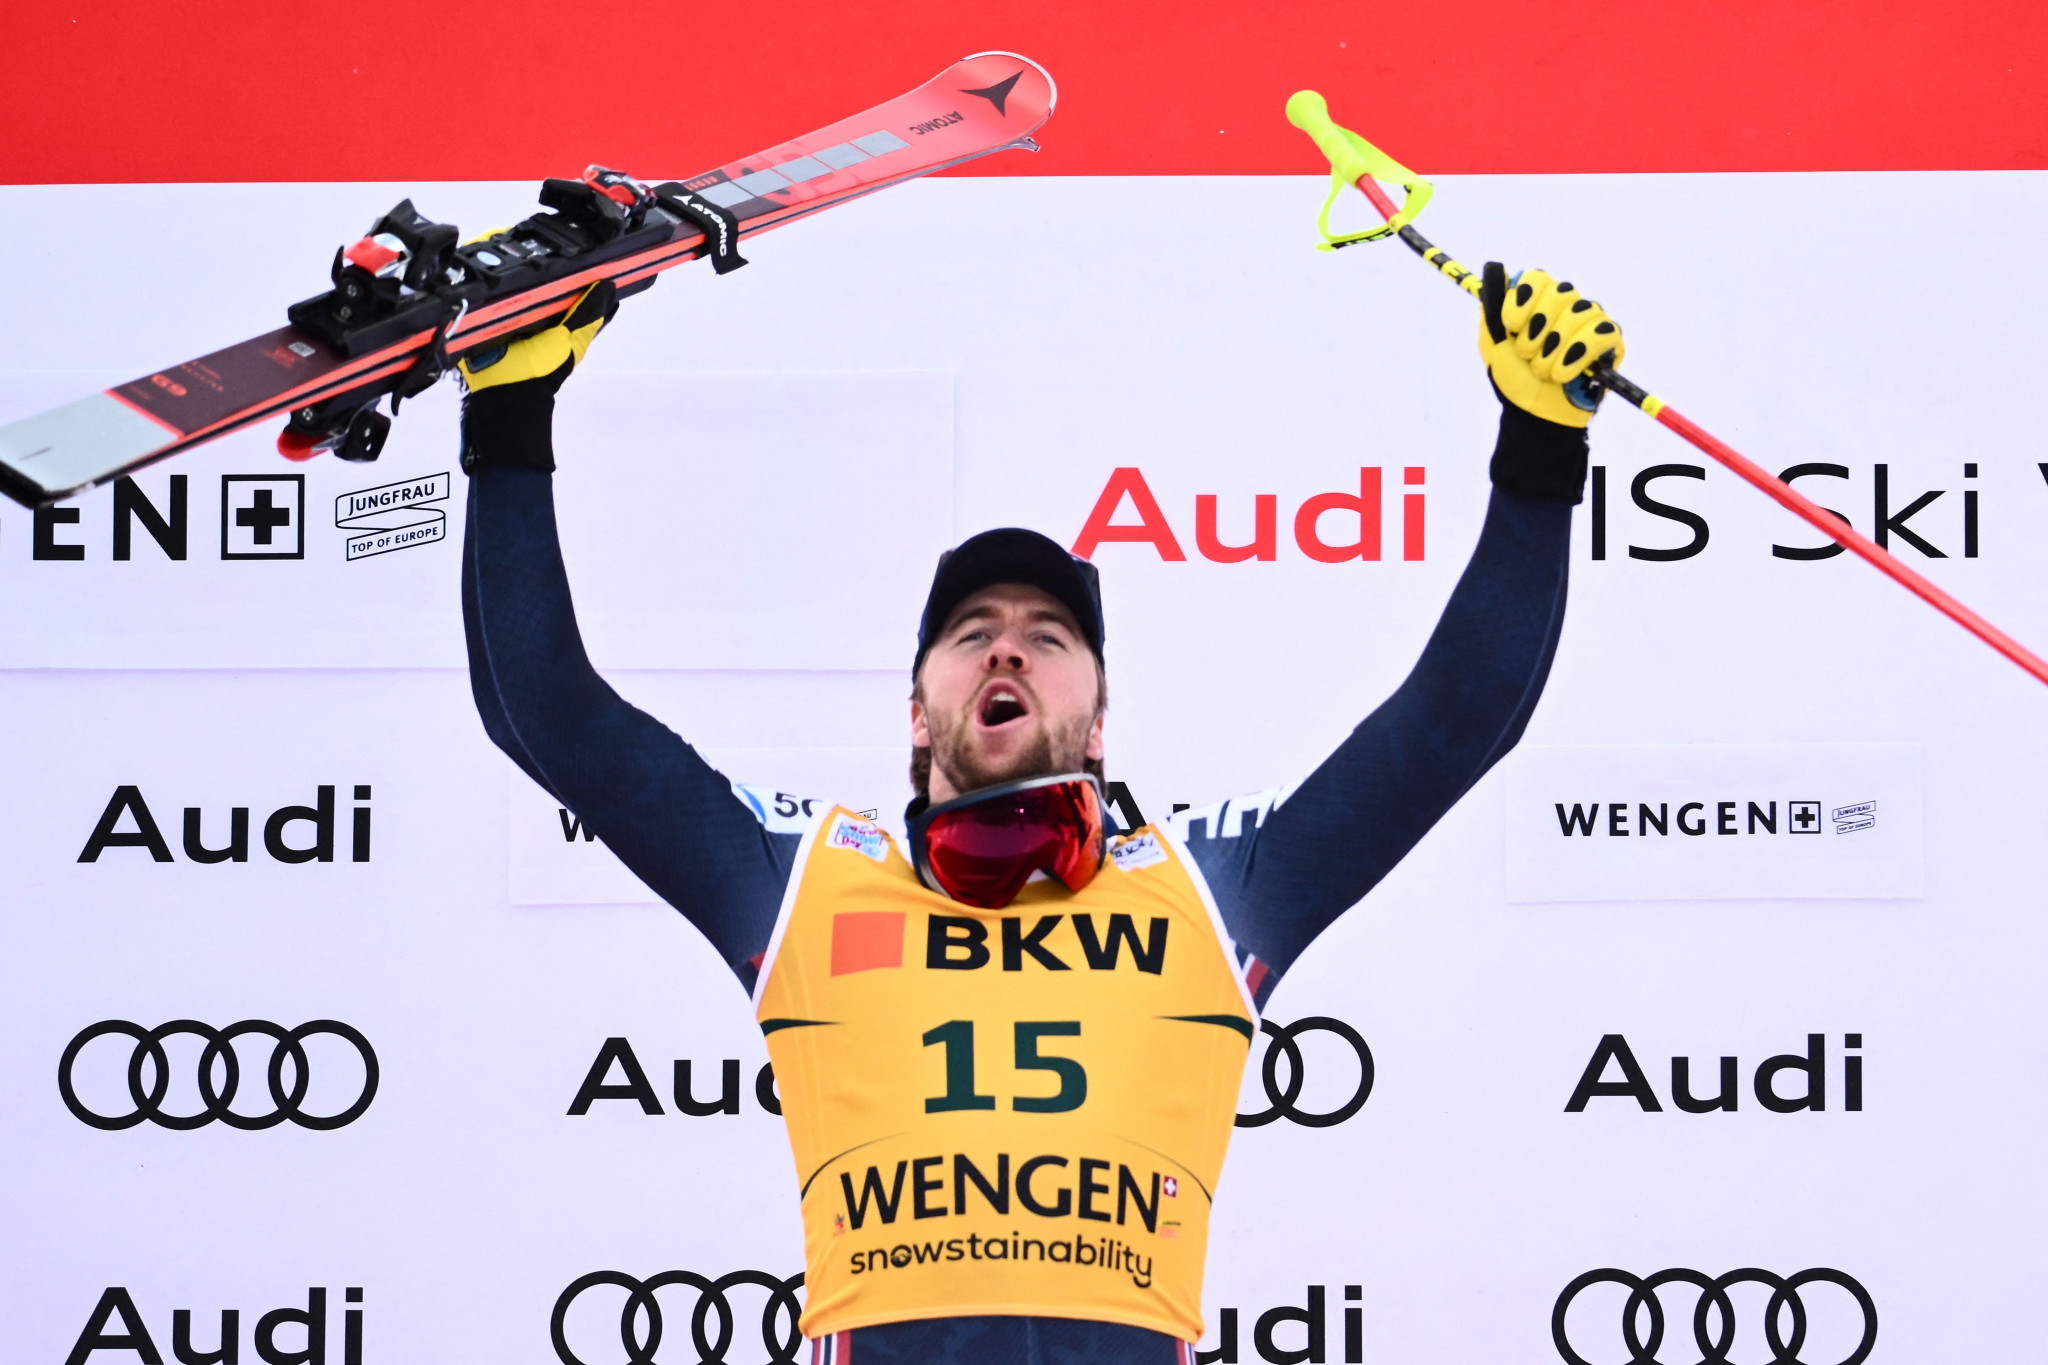 Norway's Aleksander Aamodt Kilde produced a superb run to win the FIS Alpine Ski World Cup super-G in Wengen ©Getty Images